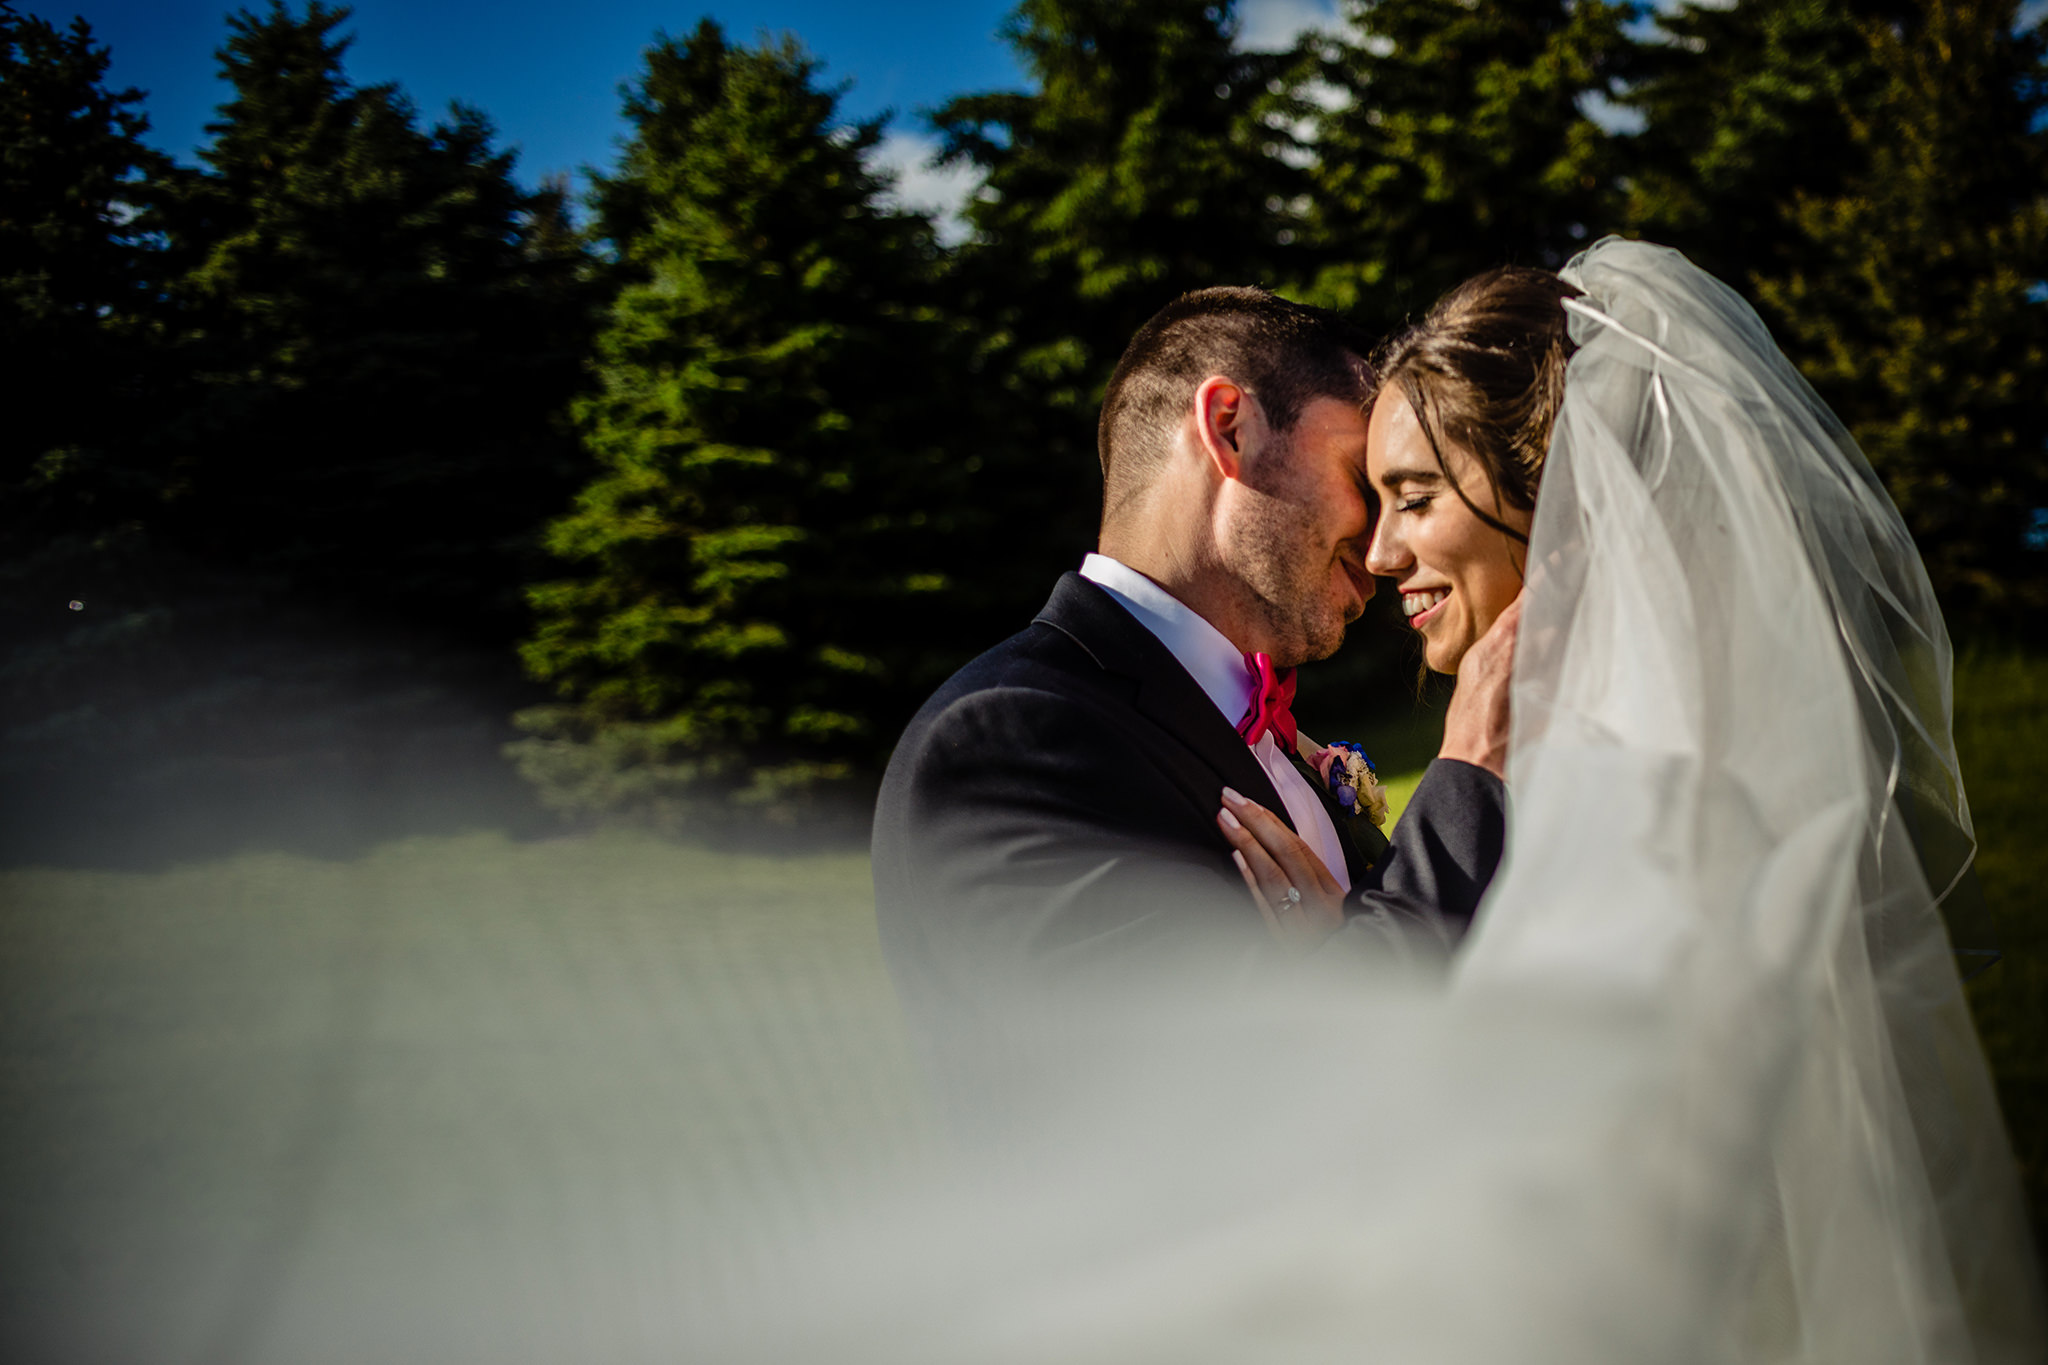 Bride and groom embrace in park while bridal veil sweeps across them